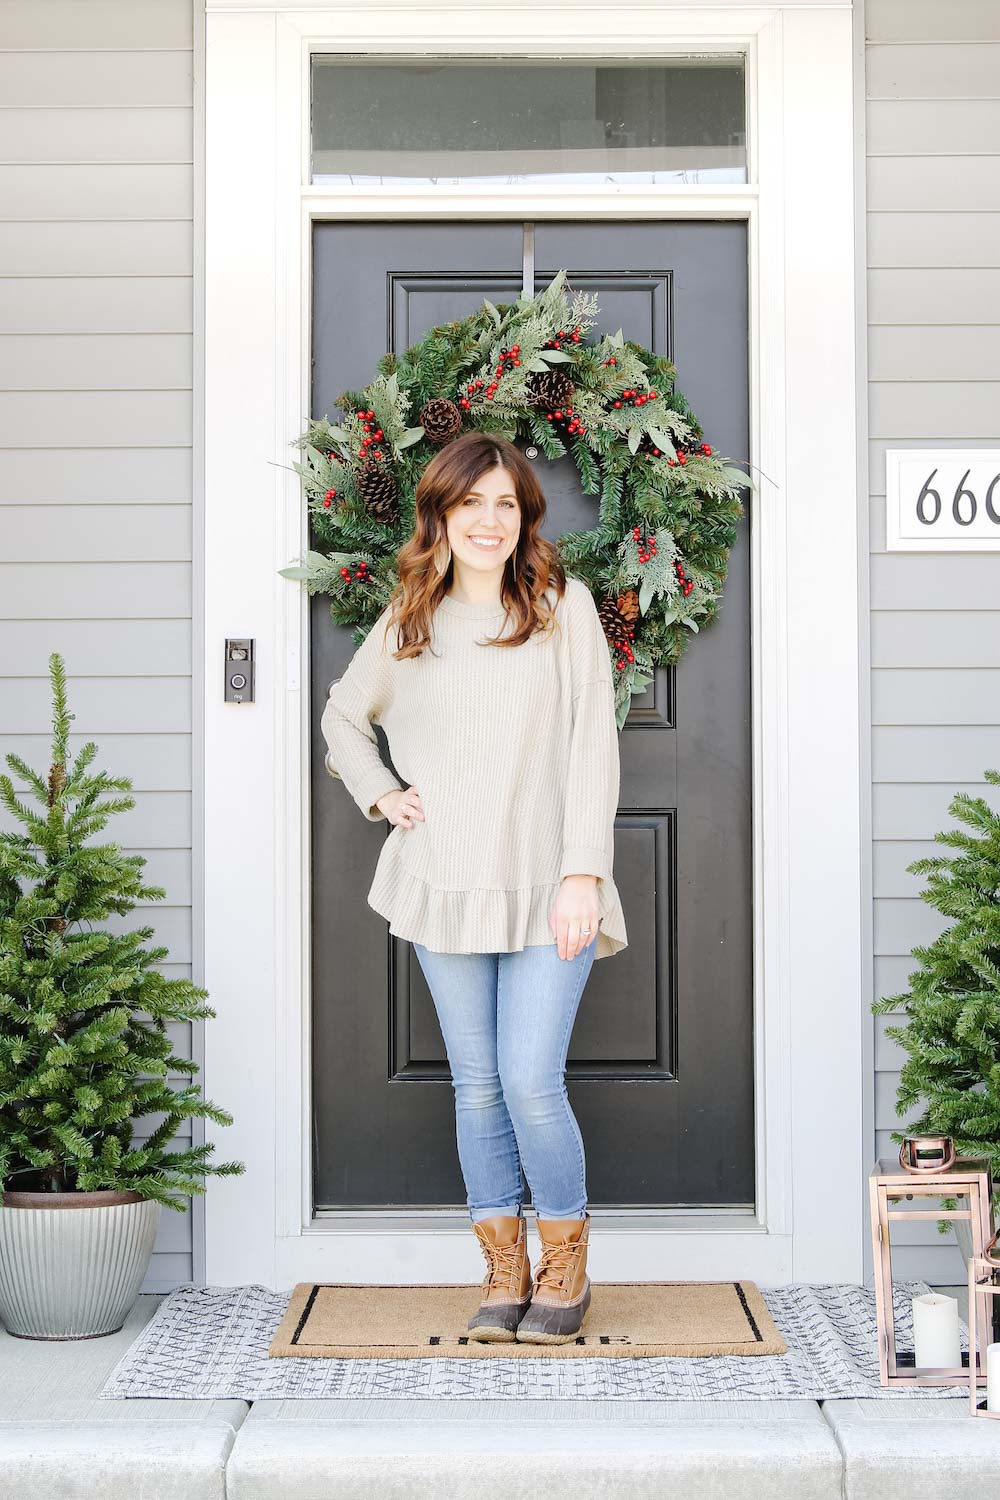 A woman standing on porch style for holidays with oversized holiday wreath and porch trees with lanterns